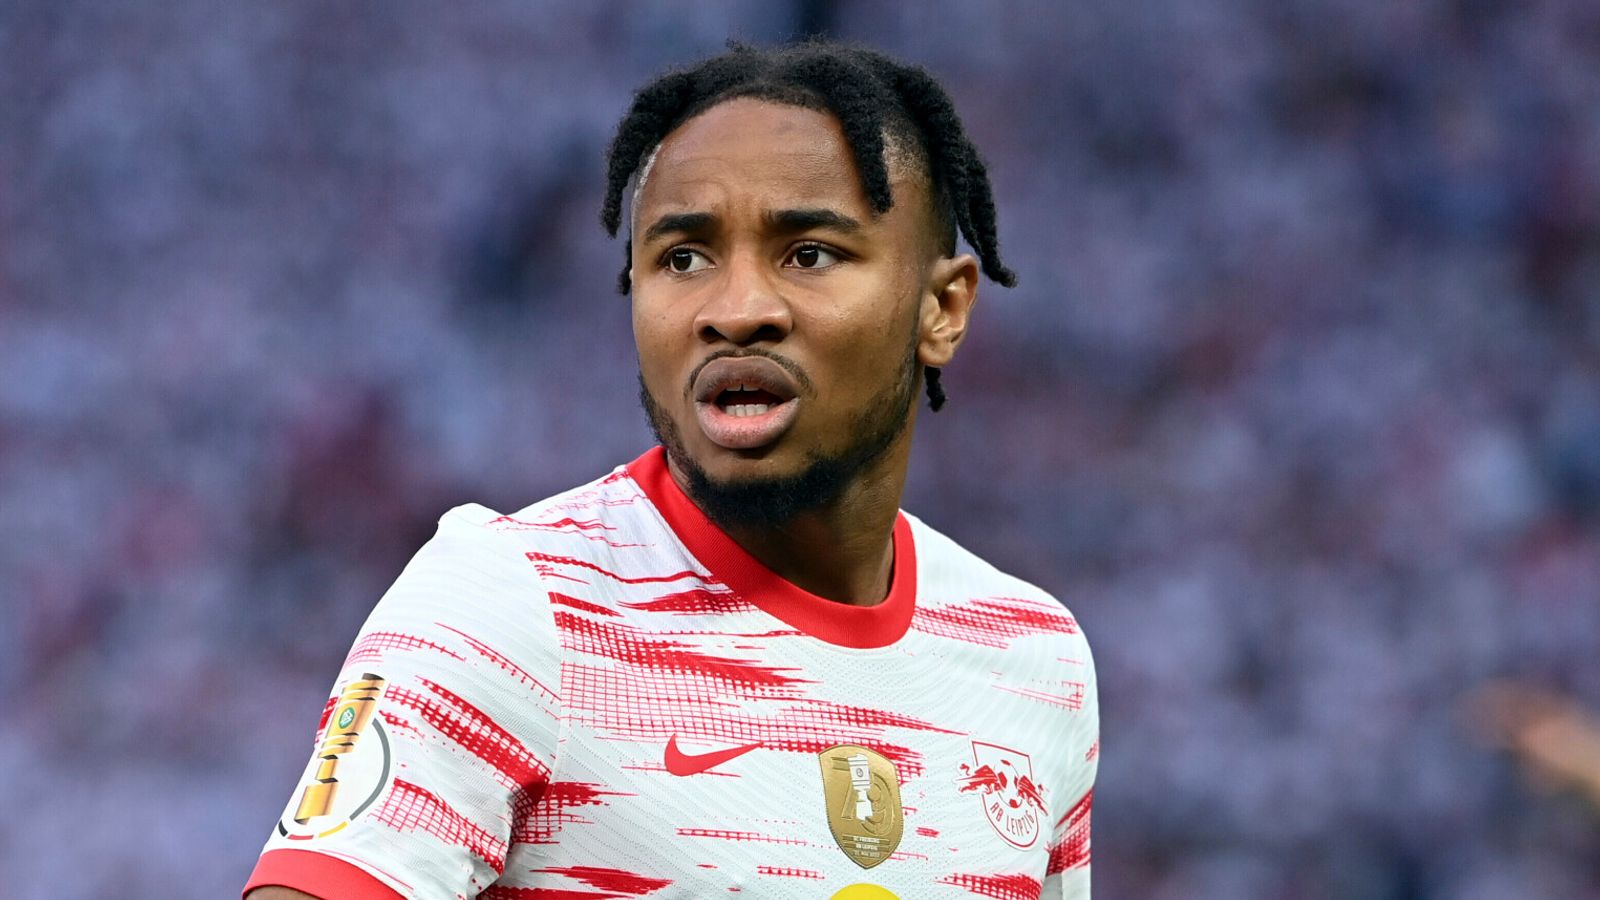 Christopher Nkunku: Chelsea closing in on transfer deal to sign RB Leipzig forward - Sky Sports